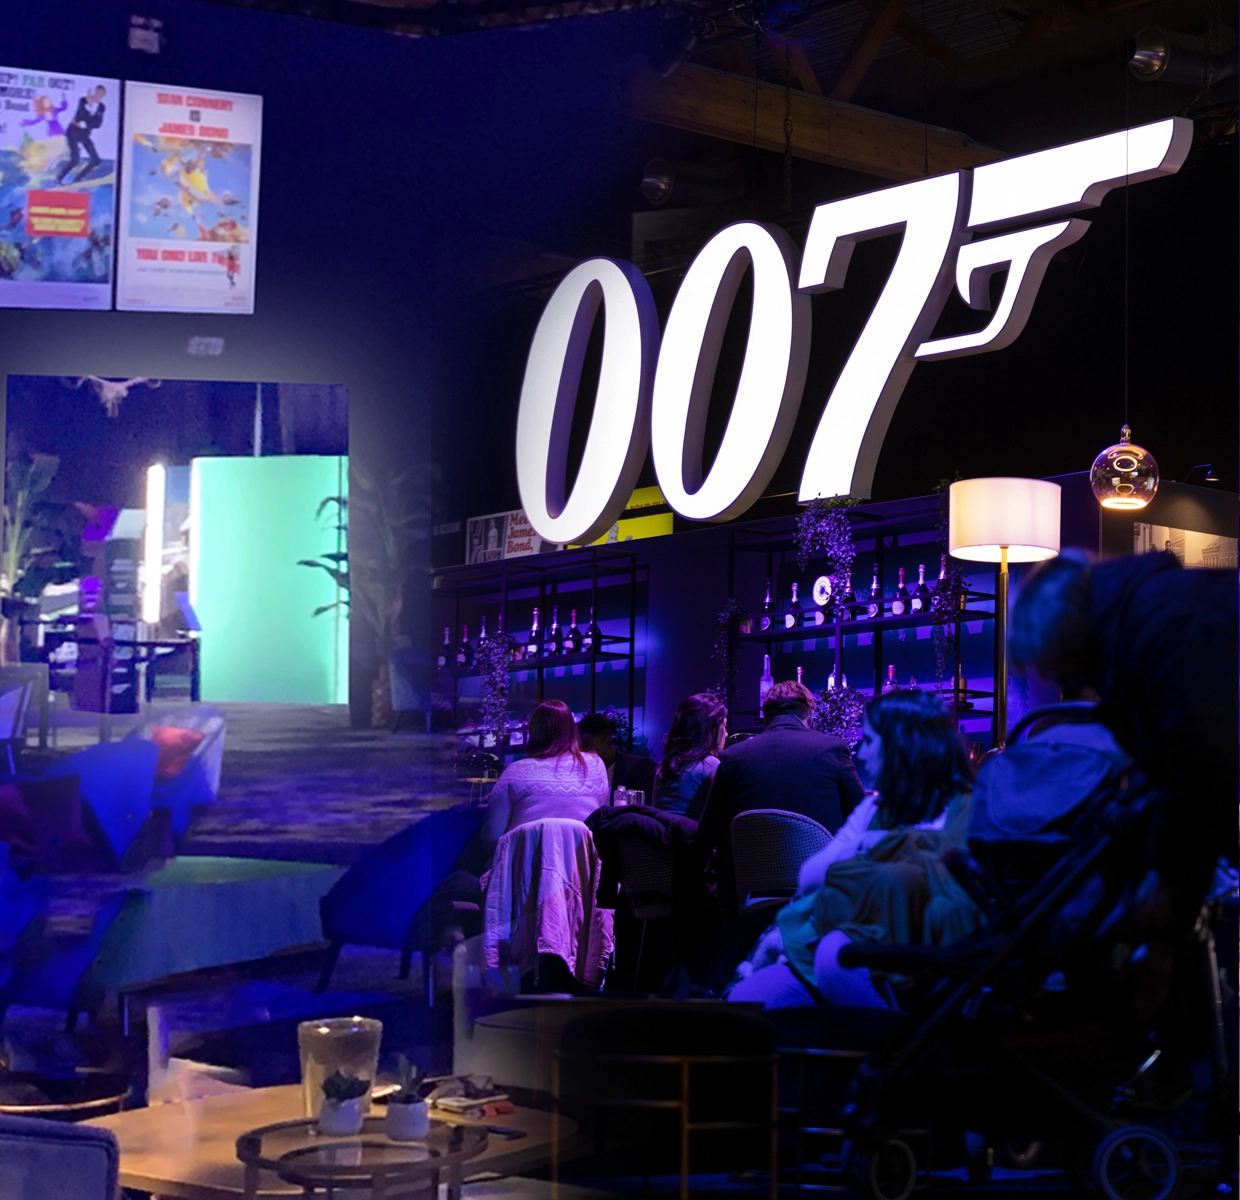 A vibrant '007' neon sign illuminating the themed lounge area at the 'Bond in Motion' exhibition, enhancing the ambiance